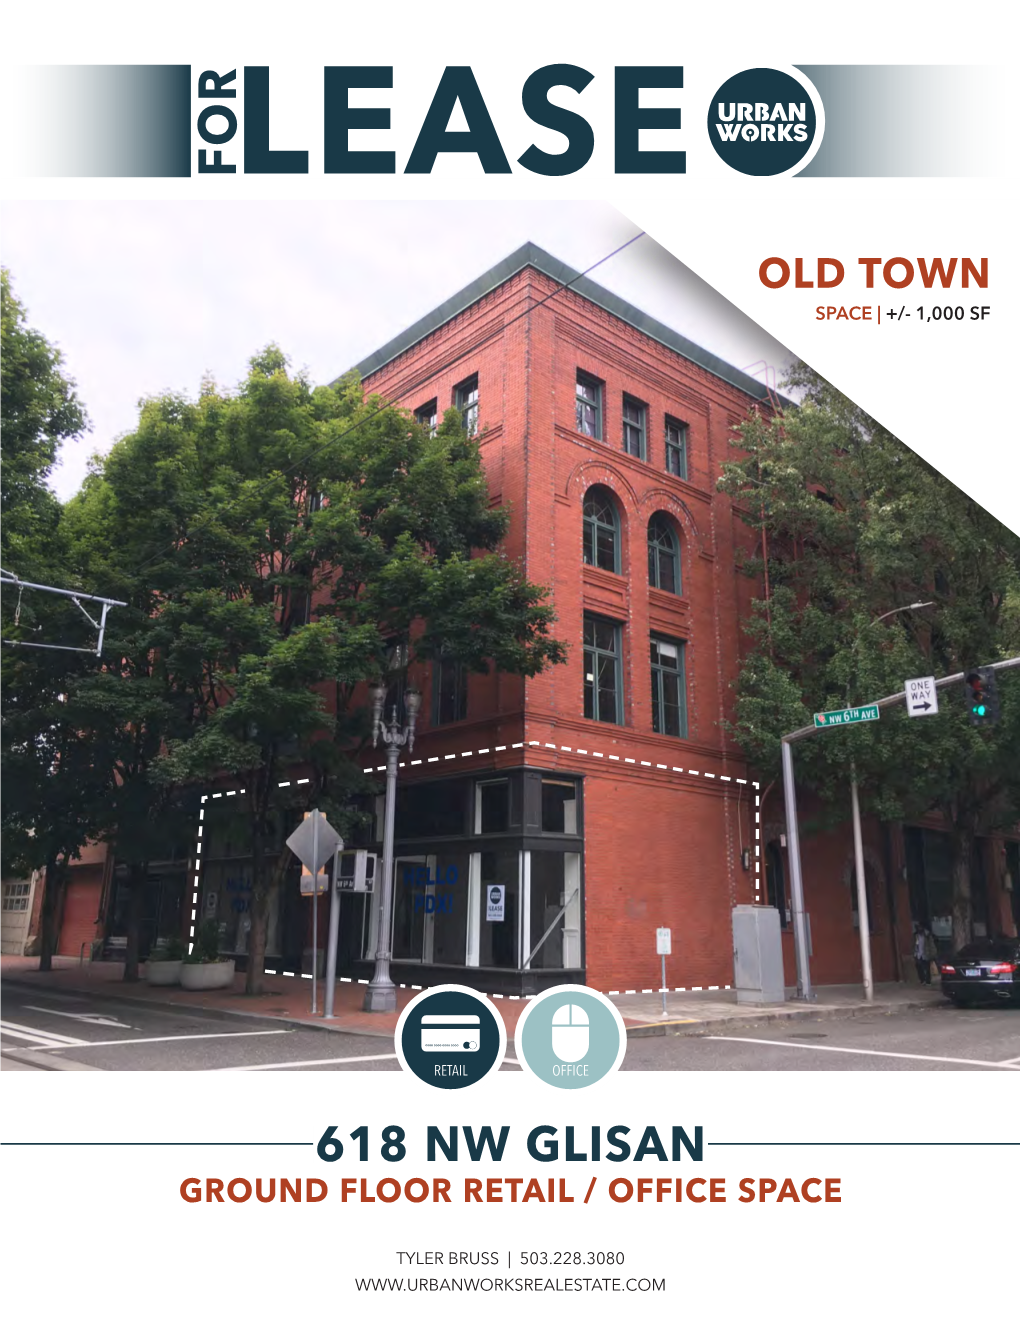 618 Nw Glisan Ground Floor Retail / Office Space